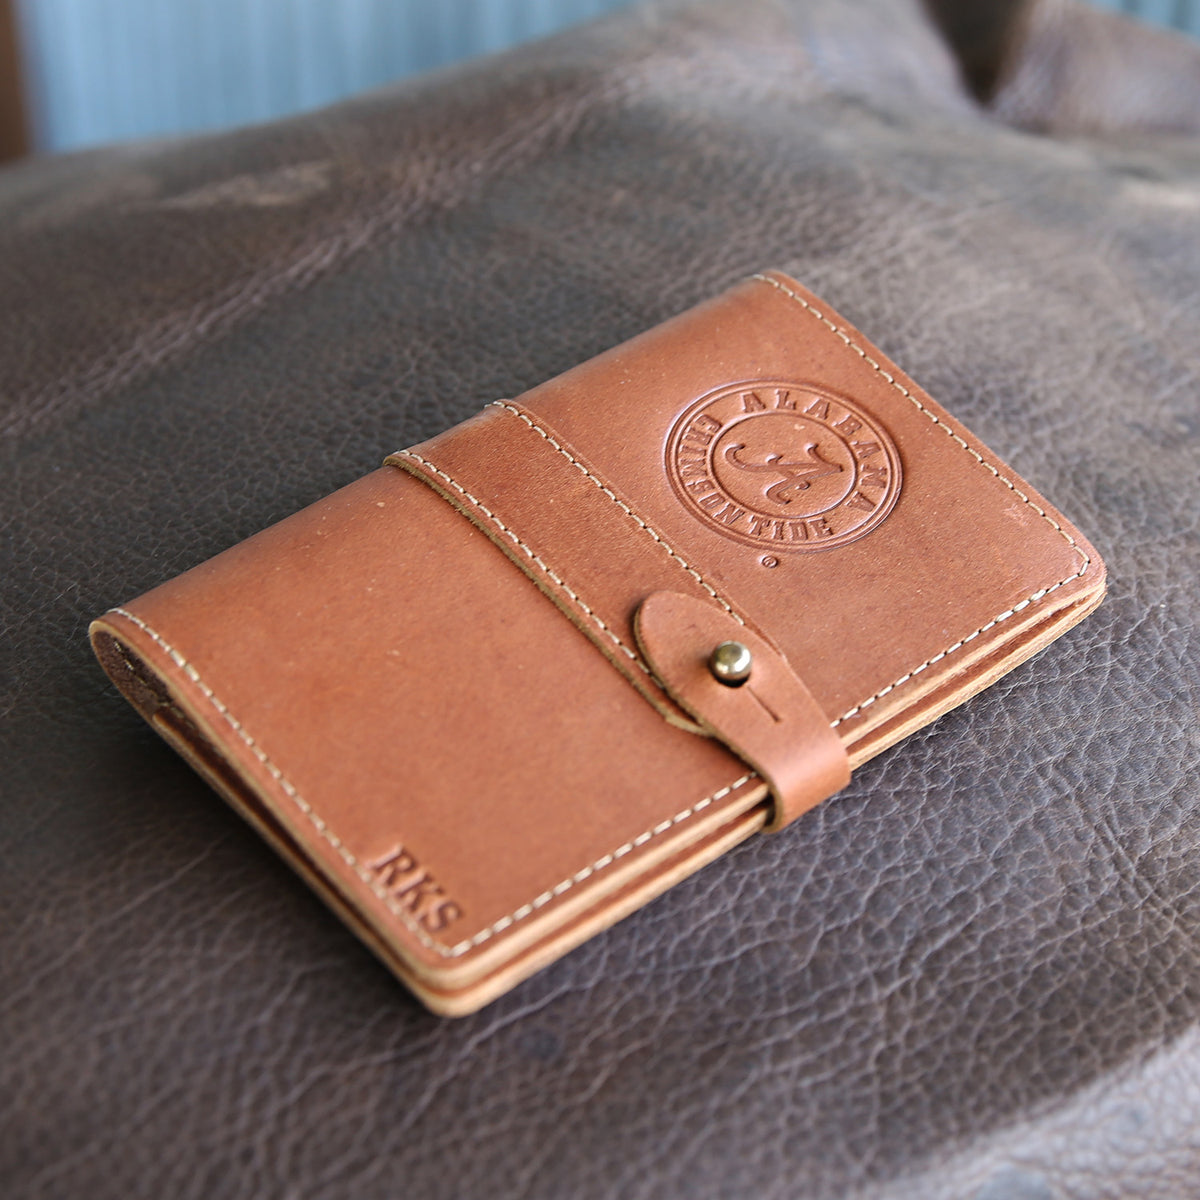 The Officially Licensed Crimson Tide Surveyor Fine Leather Pocket Journal Cover for Field Notes